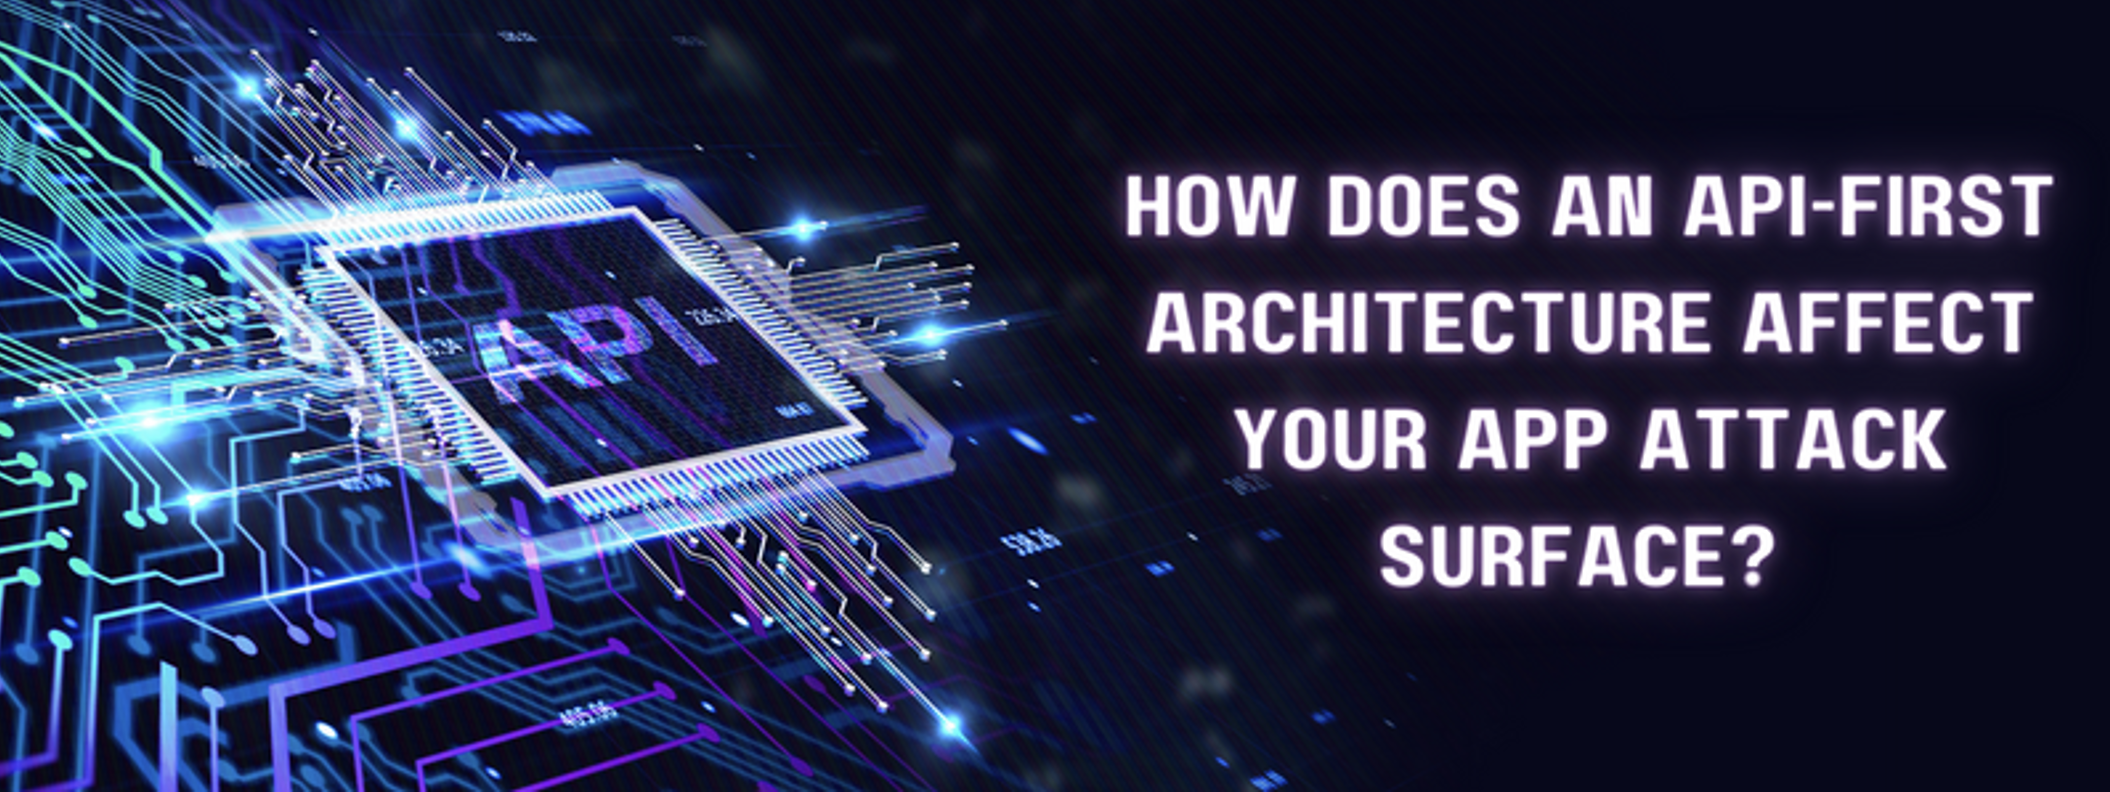 How Does an API-First Architecture Affect Your App Attack Surface?